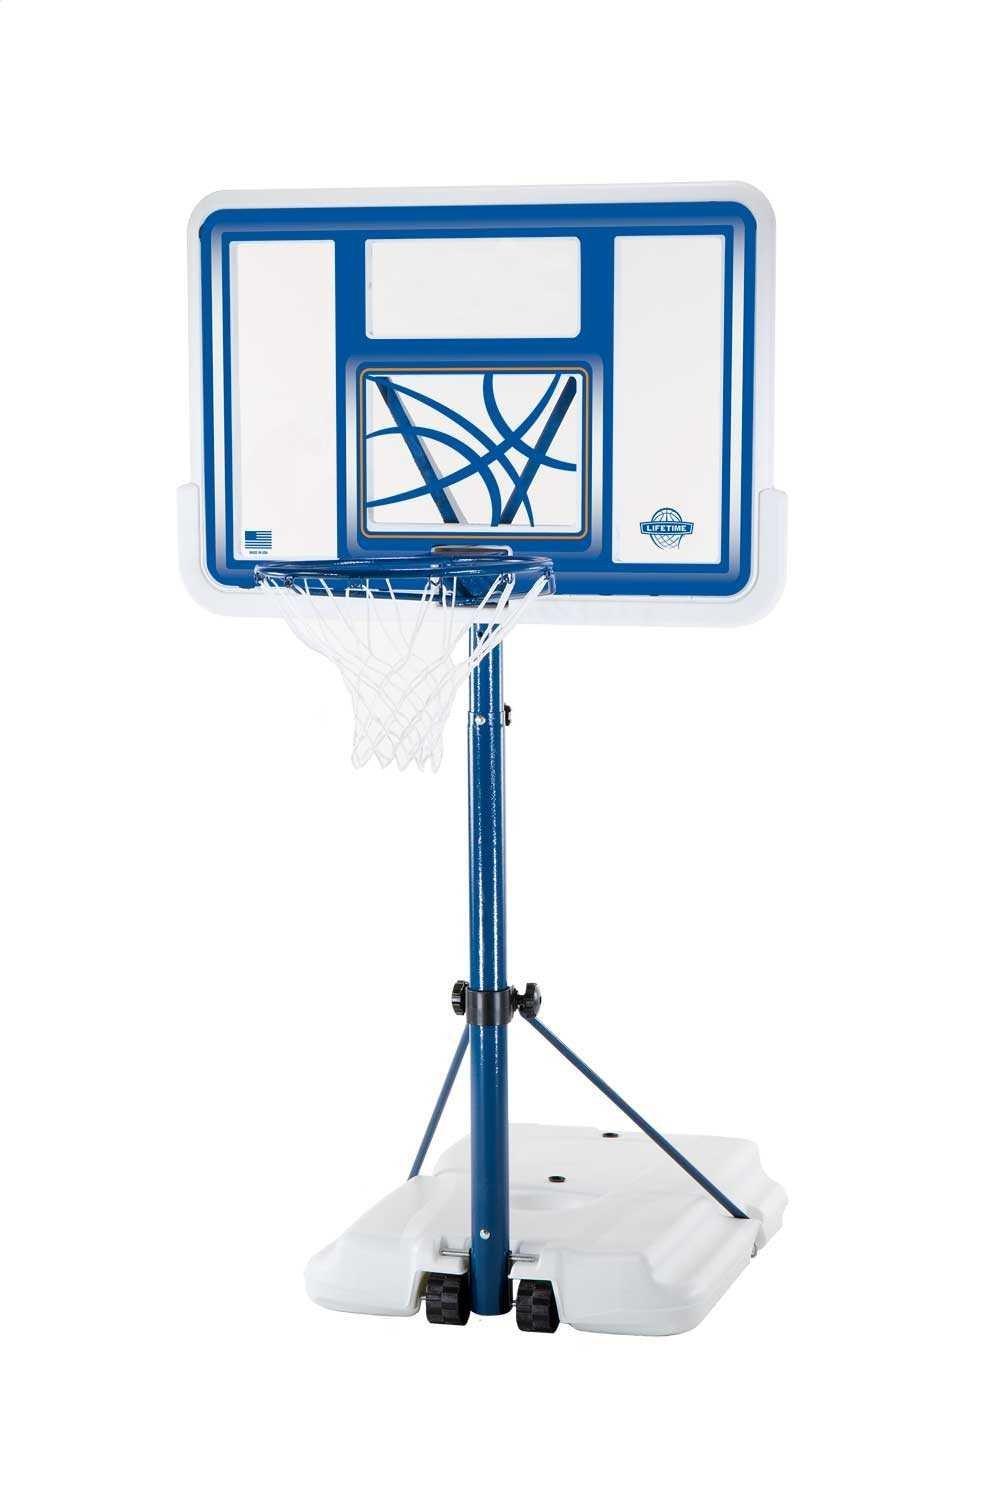 Lifetime 1531 Complete Portable Basketball System, 48" Shatter Guard Backboard - $335.00 delivered Portable basketball hoop's height can be adjusted from 7.